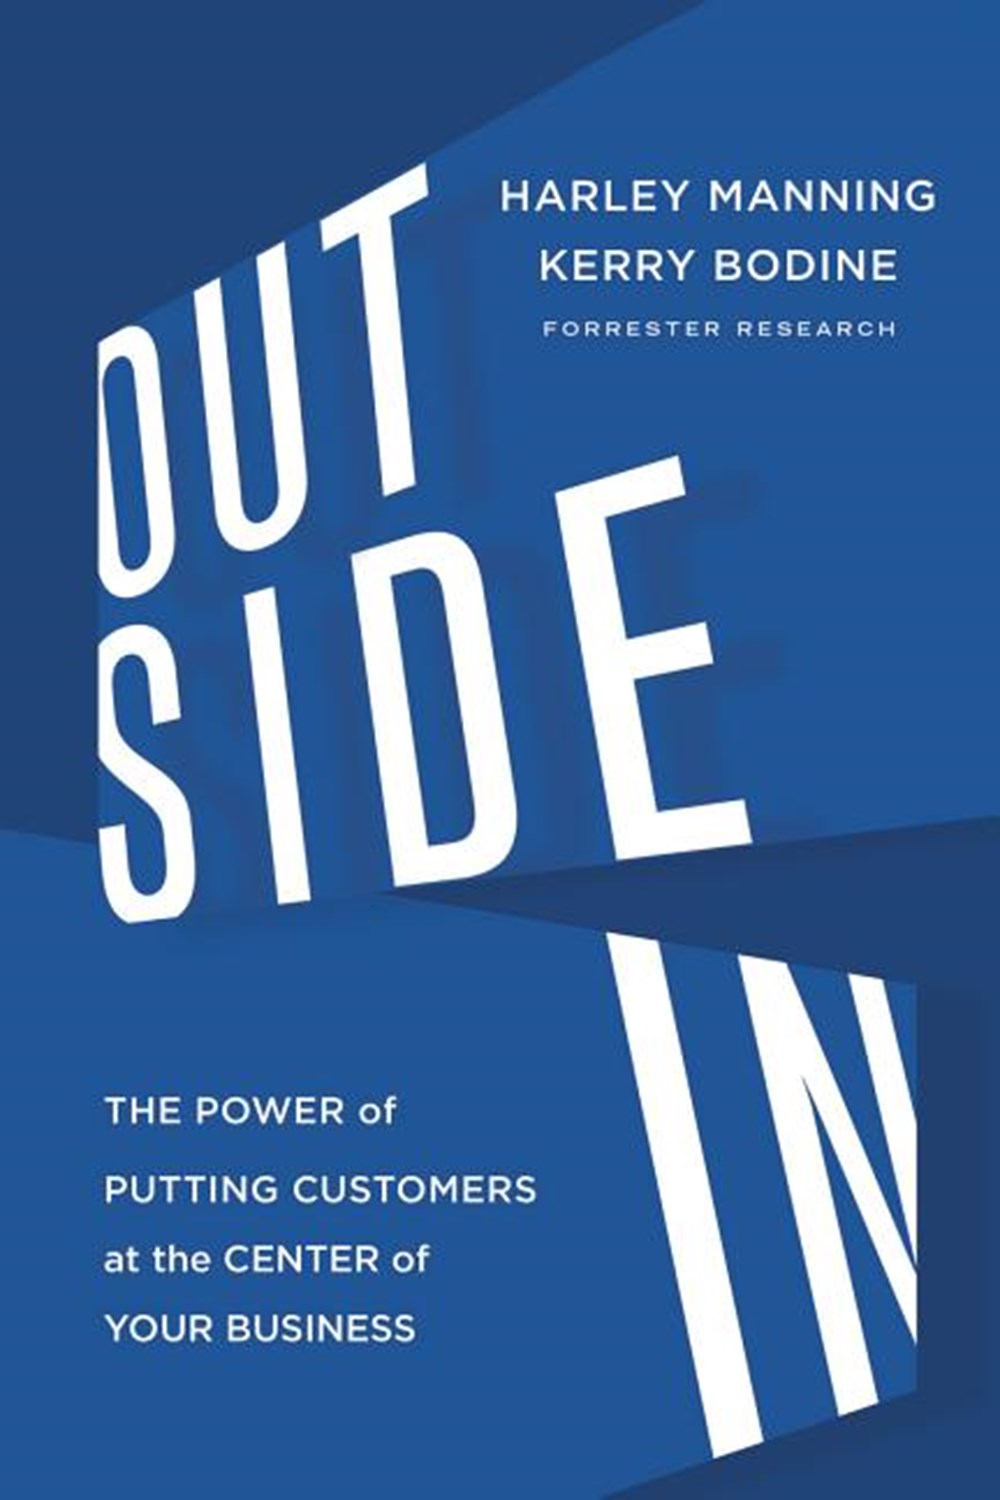 Outside in The Power of Putting Customers at the Center of Your Business